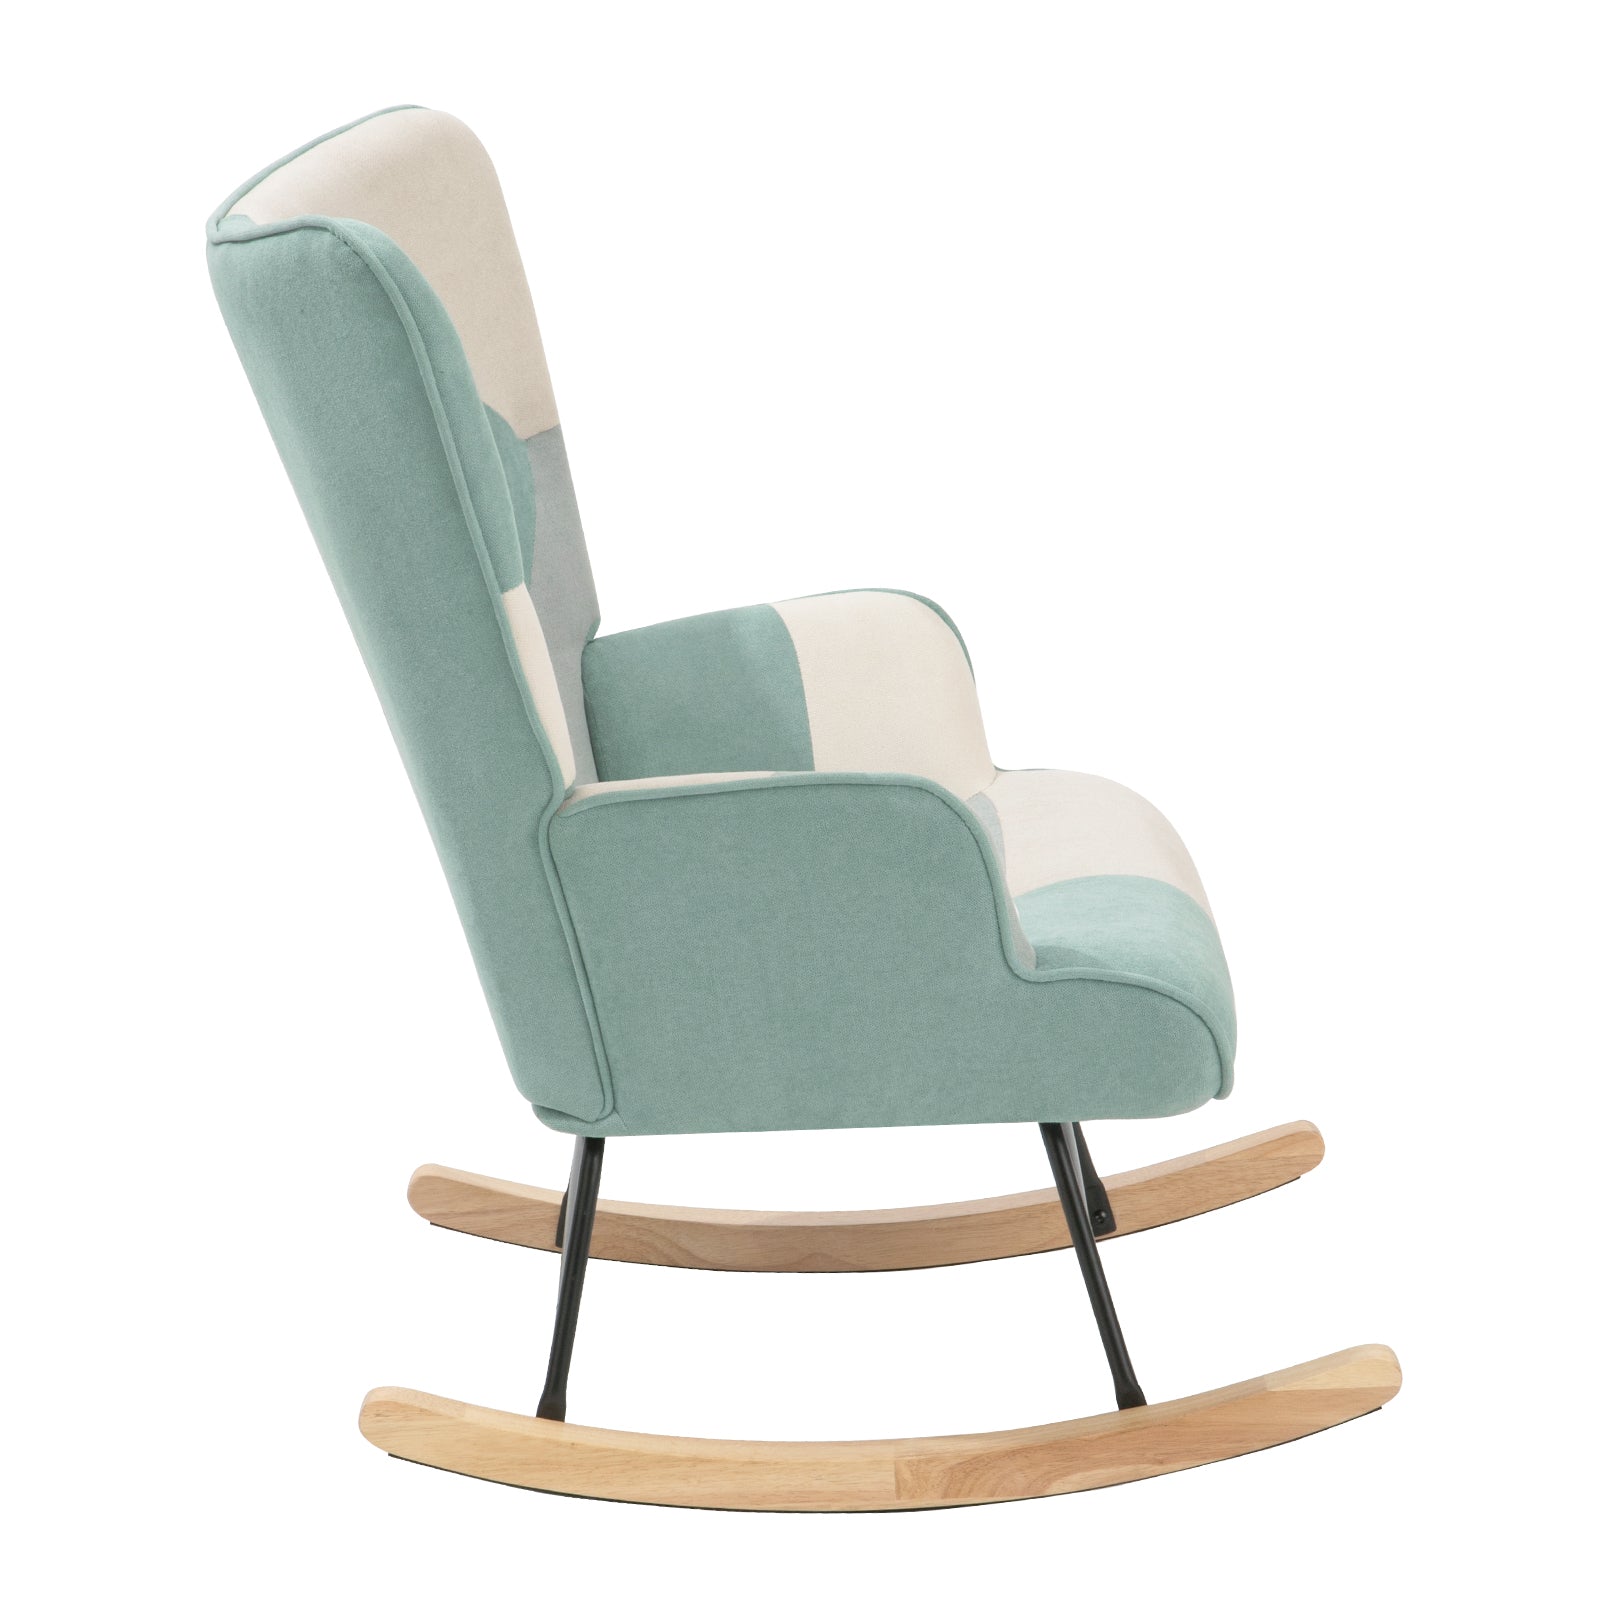 ZNTS Rocking Chair, Mid Century Fabric Rocker Chair with Wood Legs and Patchwork Linen for Livingroom W109543644